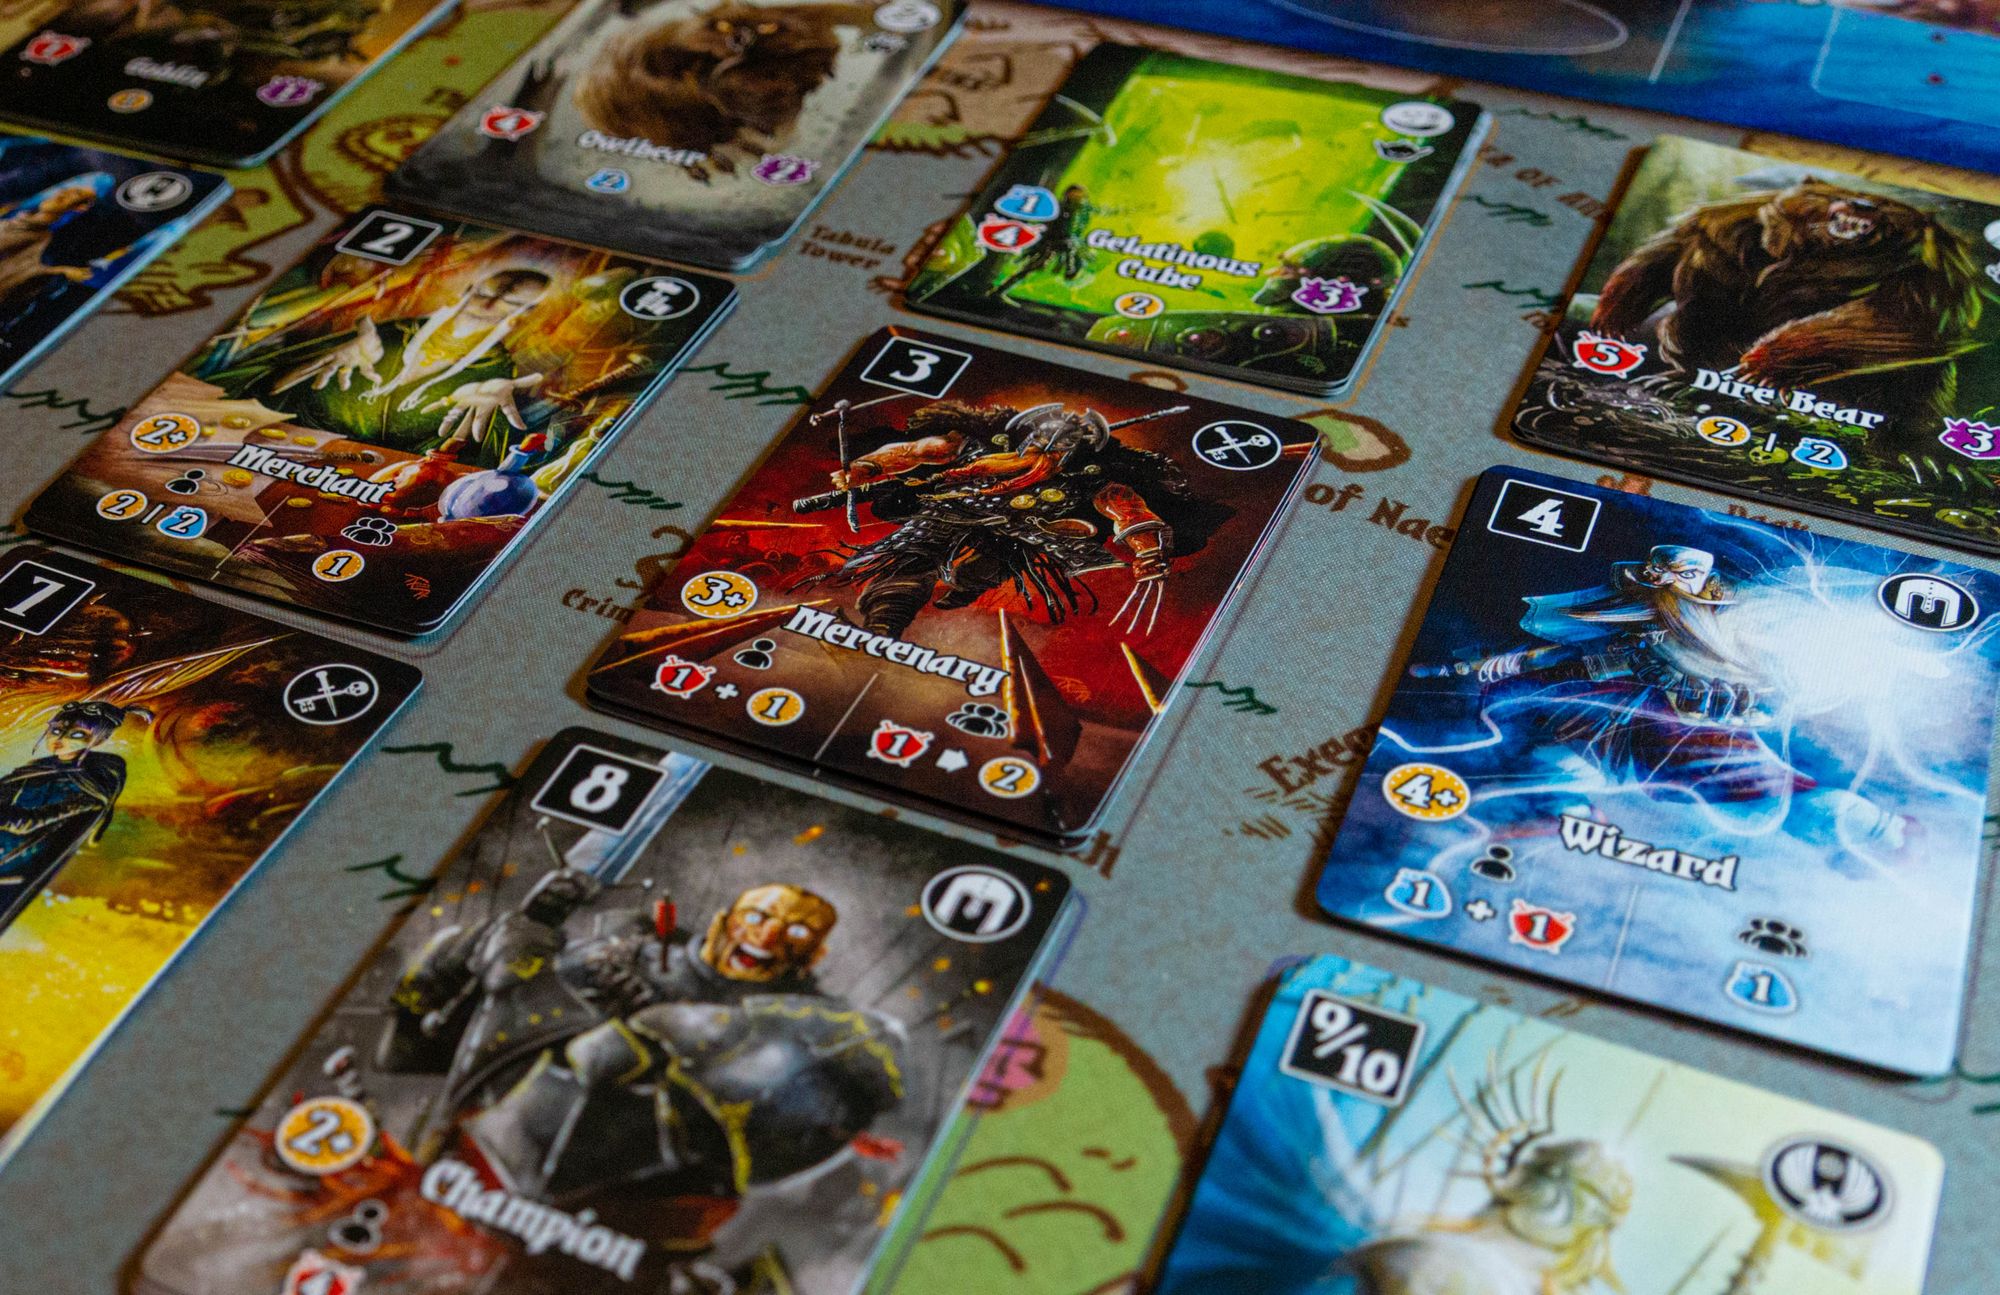 Review: Dice Kingdoms of Valeria Winter Expansion